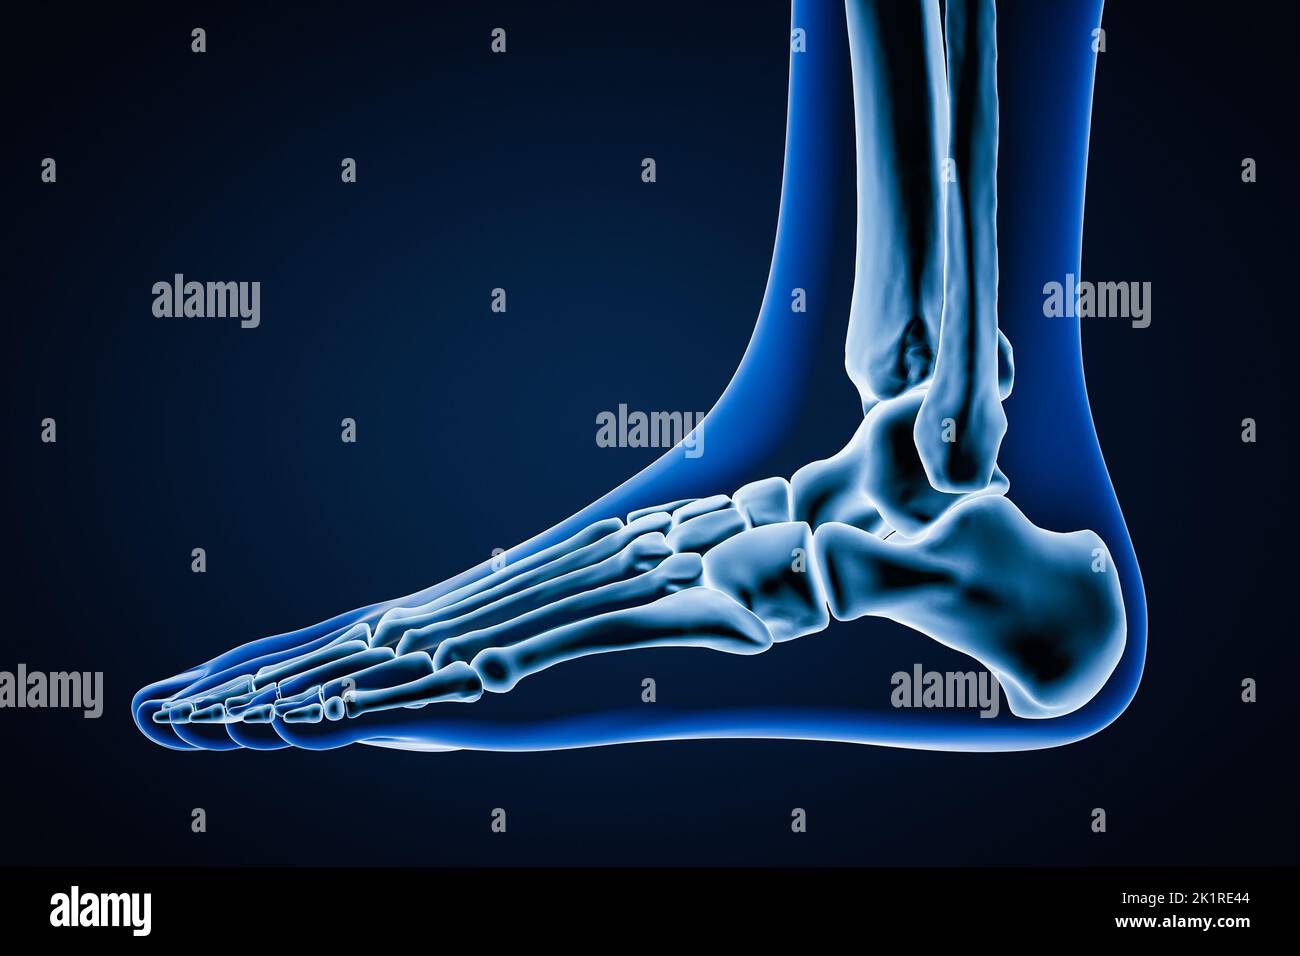 Lateral or profile view of accurate human left foot bones with body contours on blue background 3D rendering illustration. Anatomy, osteology, orthope Stock Photo